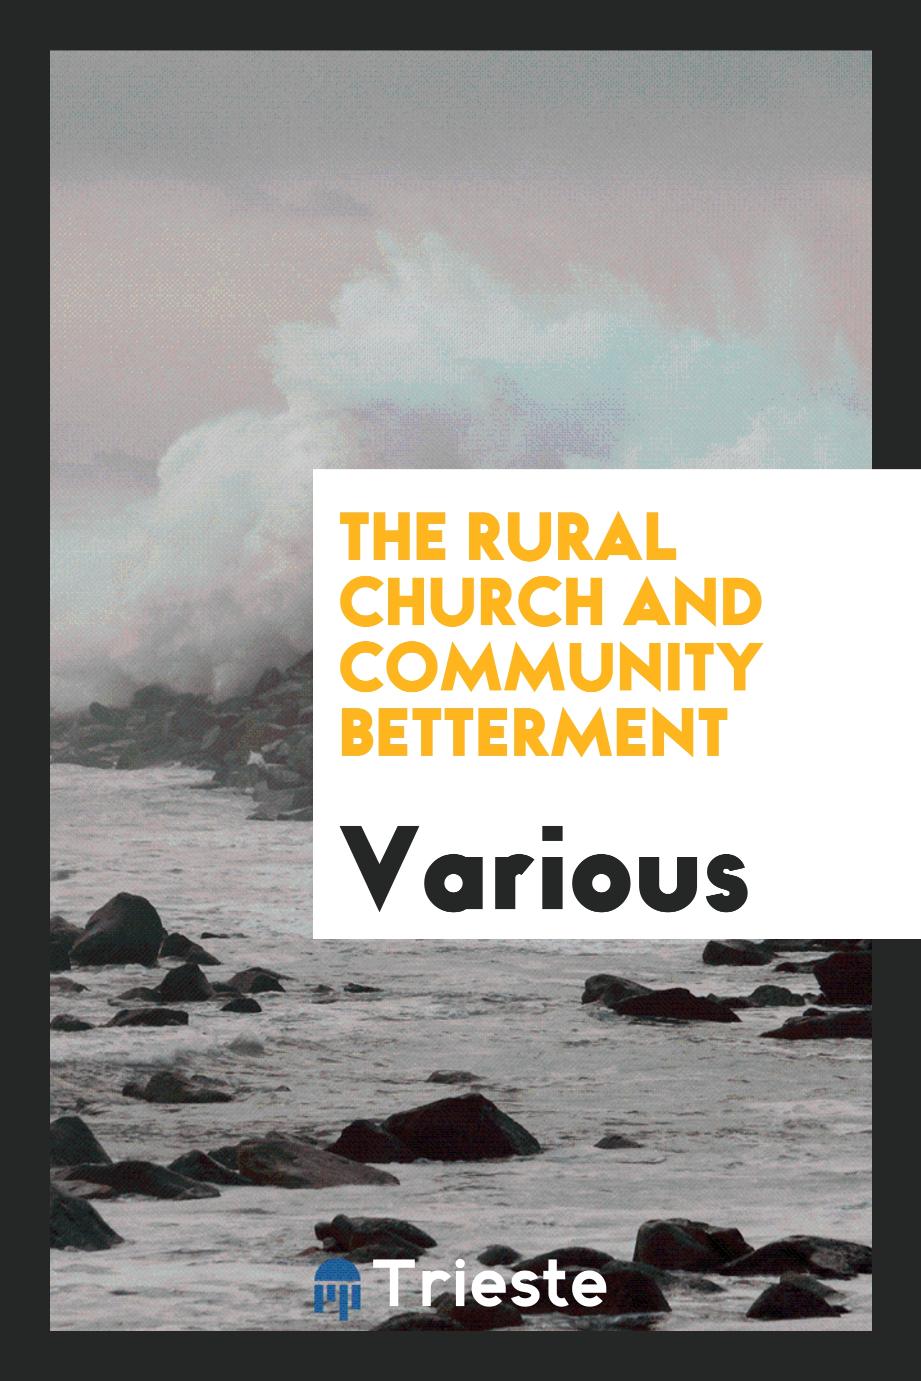 The Rural Church and Community Betterment